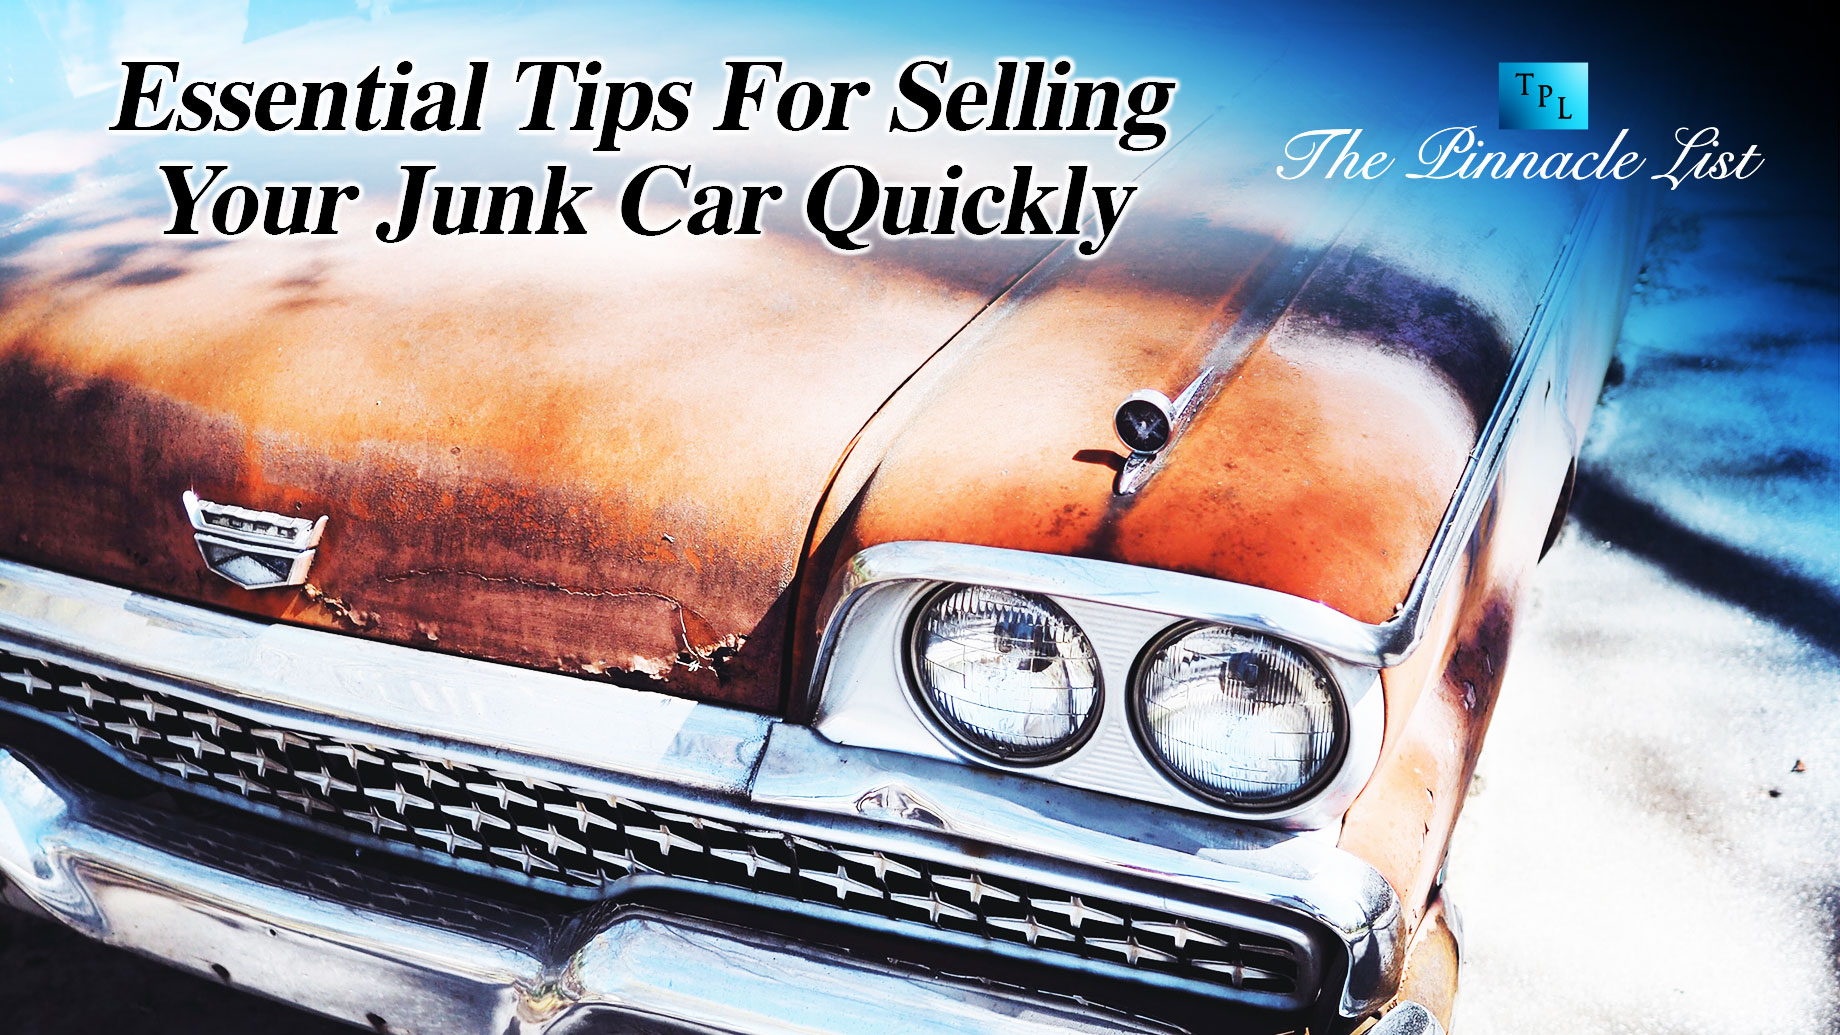 Essential Tips For Selling Your Junk Car Quickly